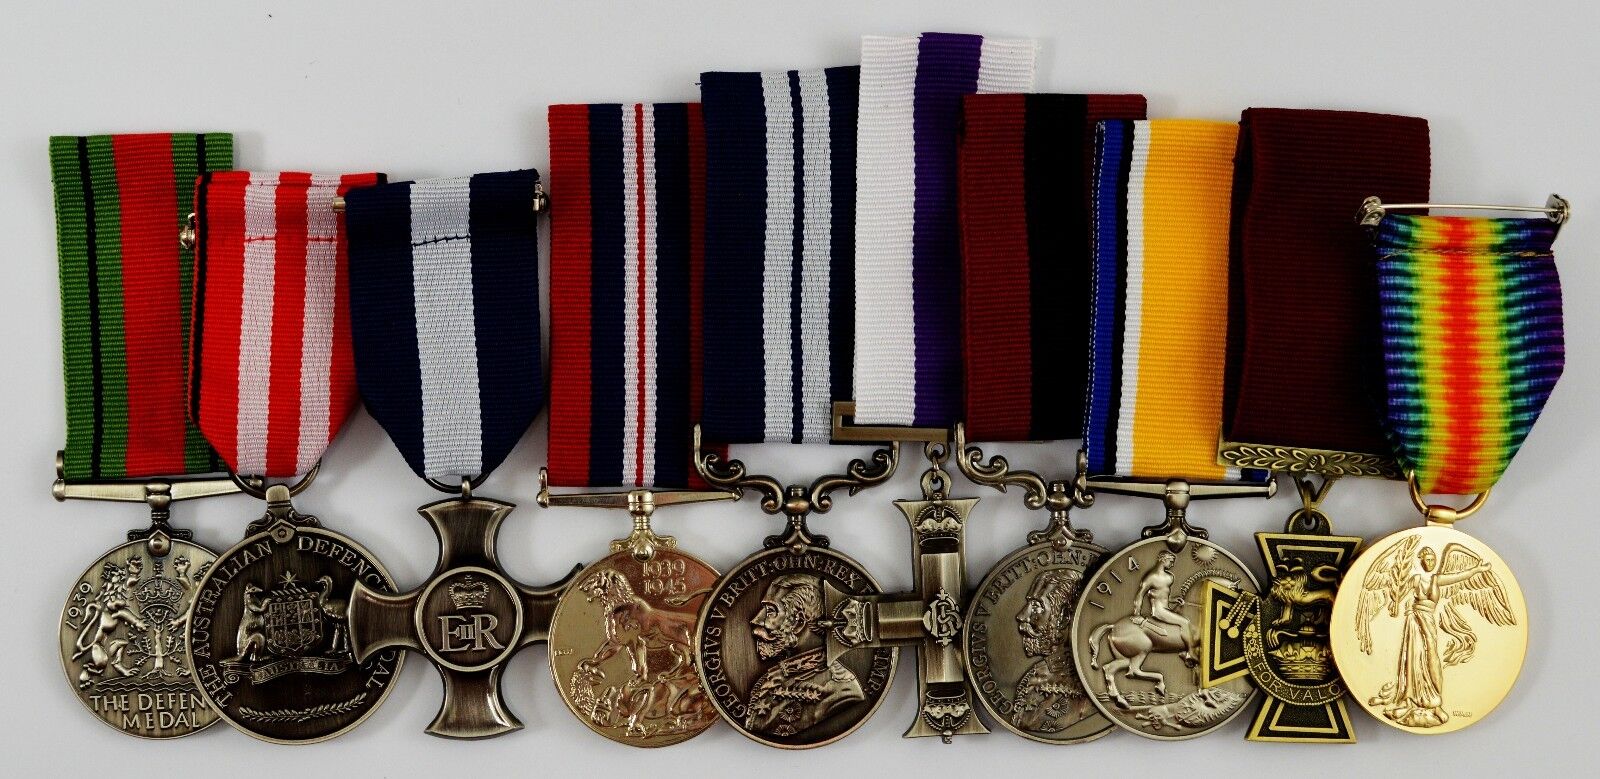 Superb Set of 10 Full Size Replica WW1 WW2 War Medals British/Imperial/Campaign